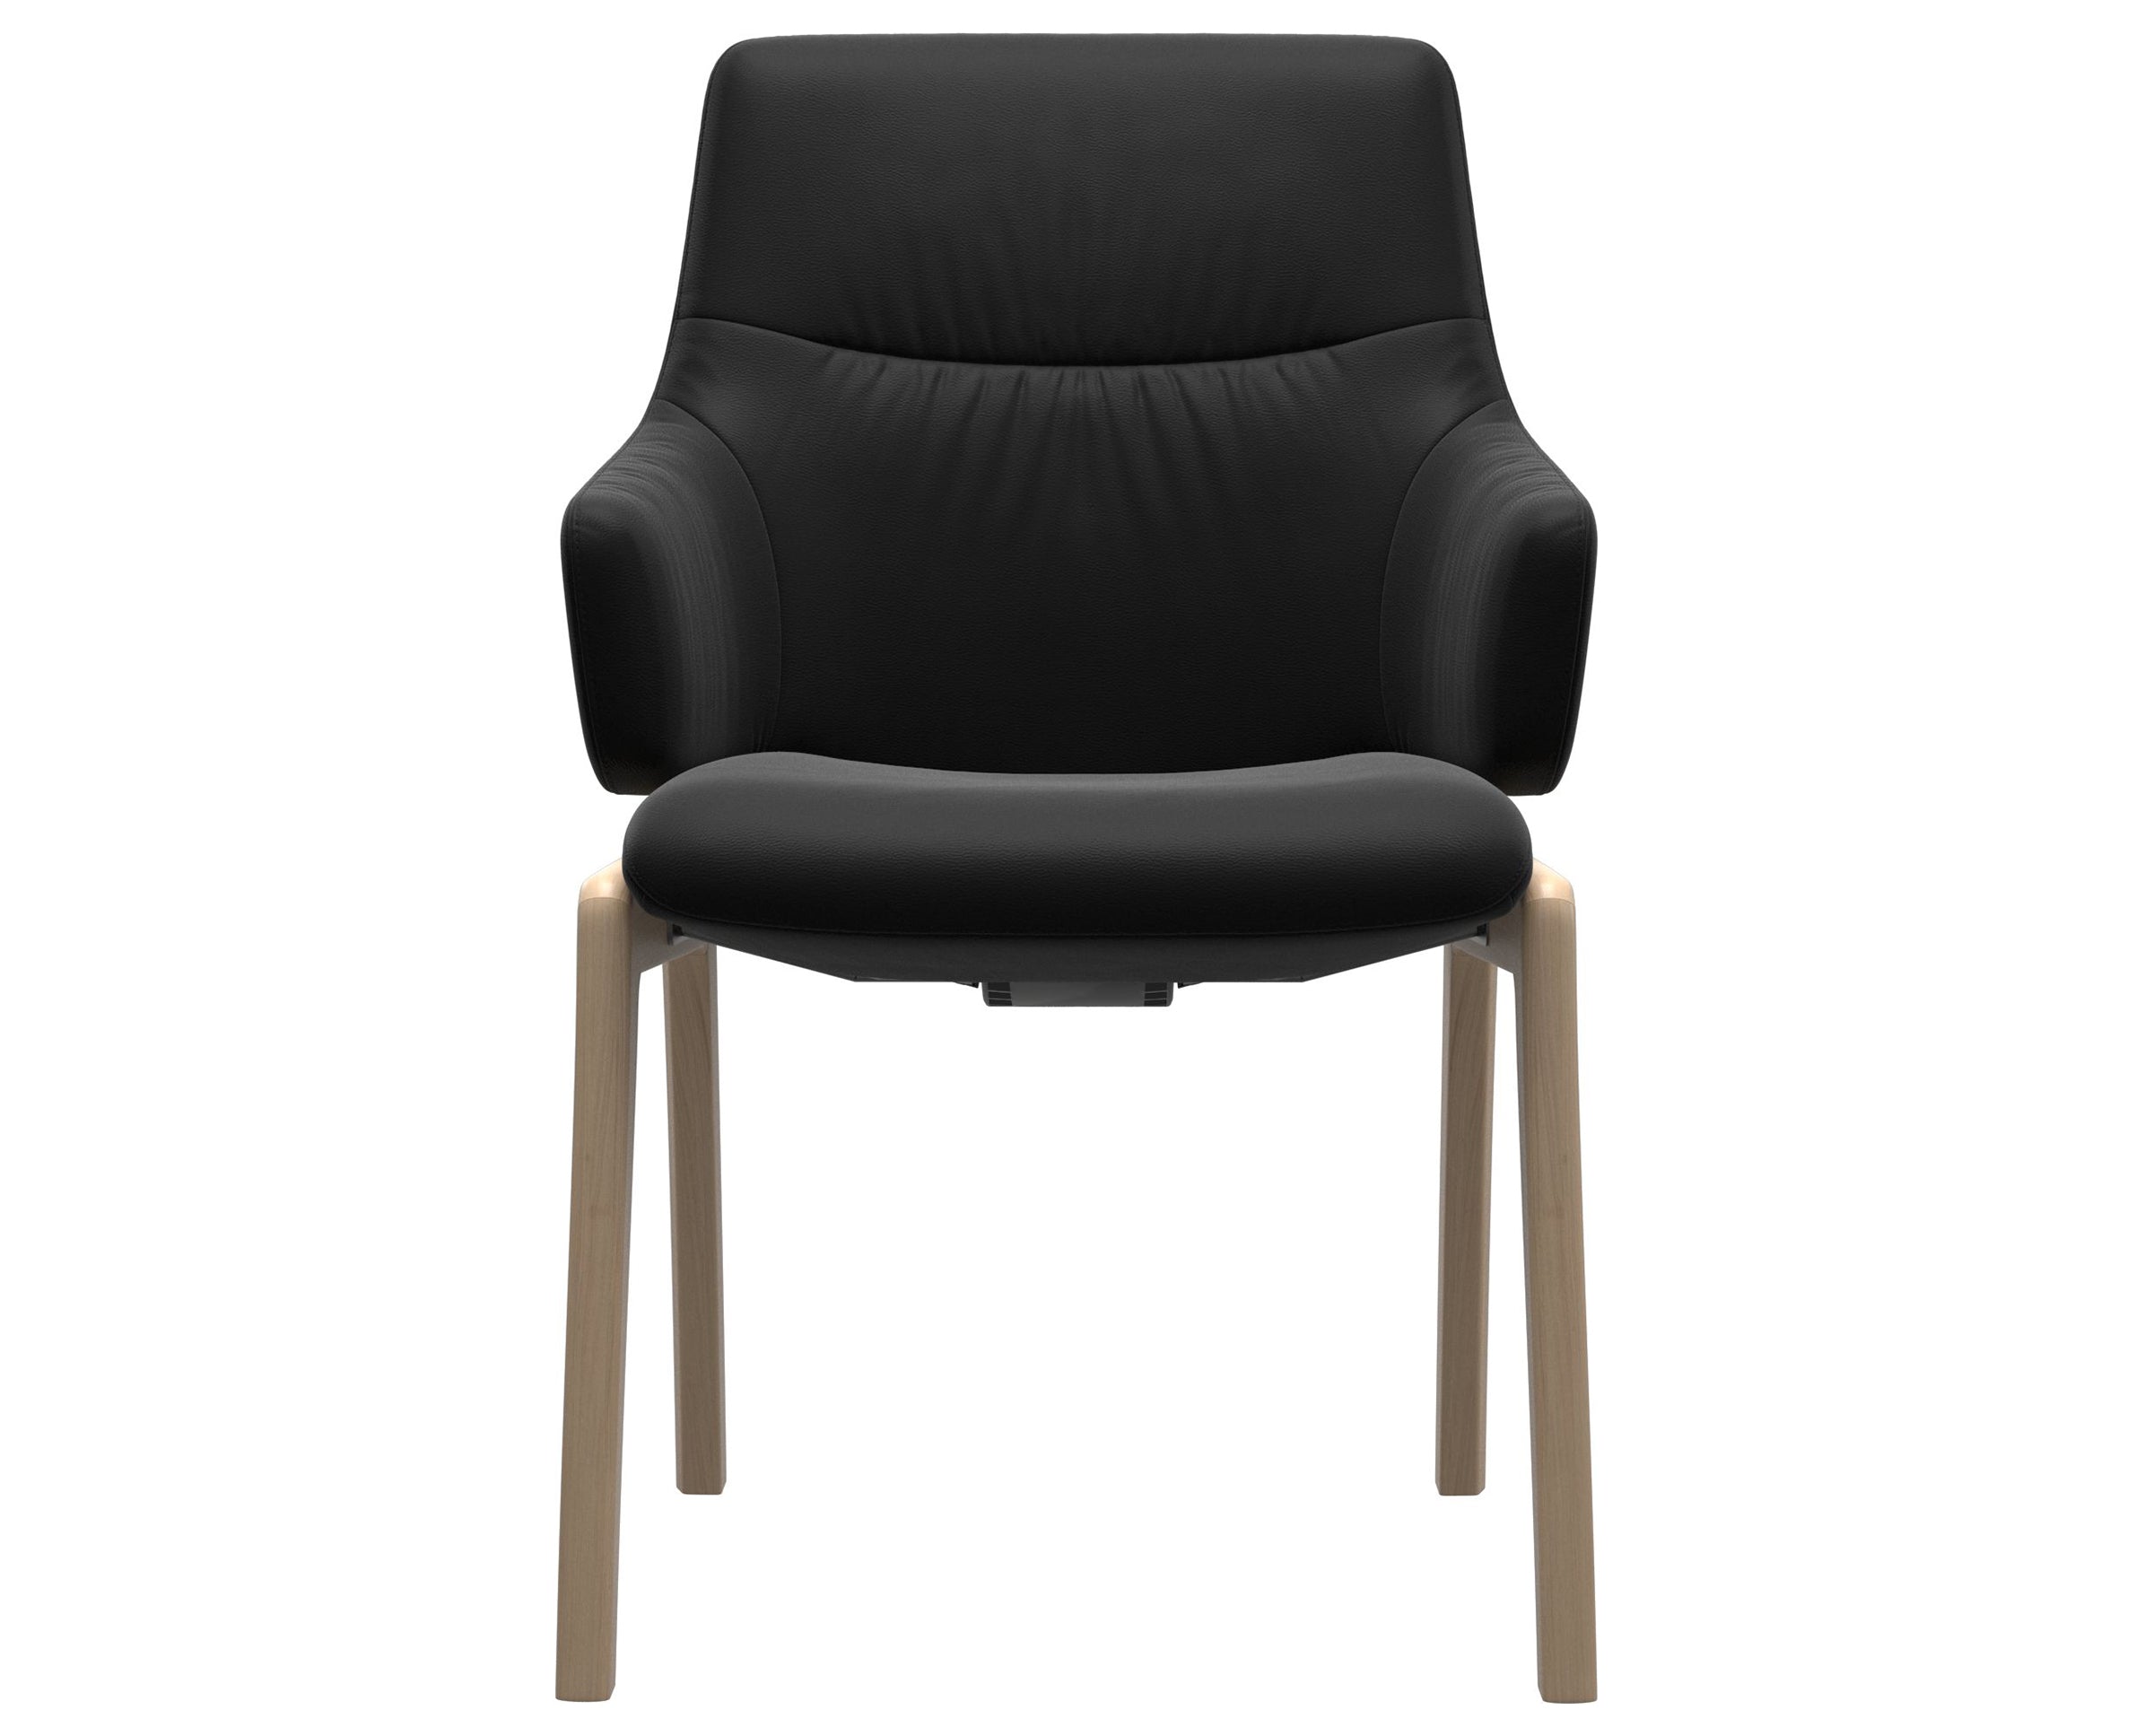 Paloma Leather Black and Natural Base | Stressless Mint Low Back D100 Dining Chair w/Arms | Valley Ridge Furniture